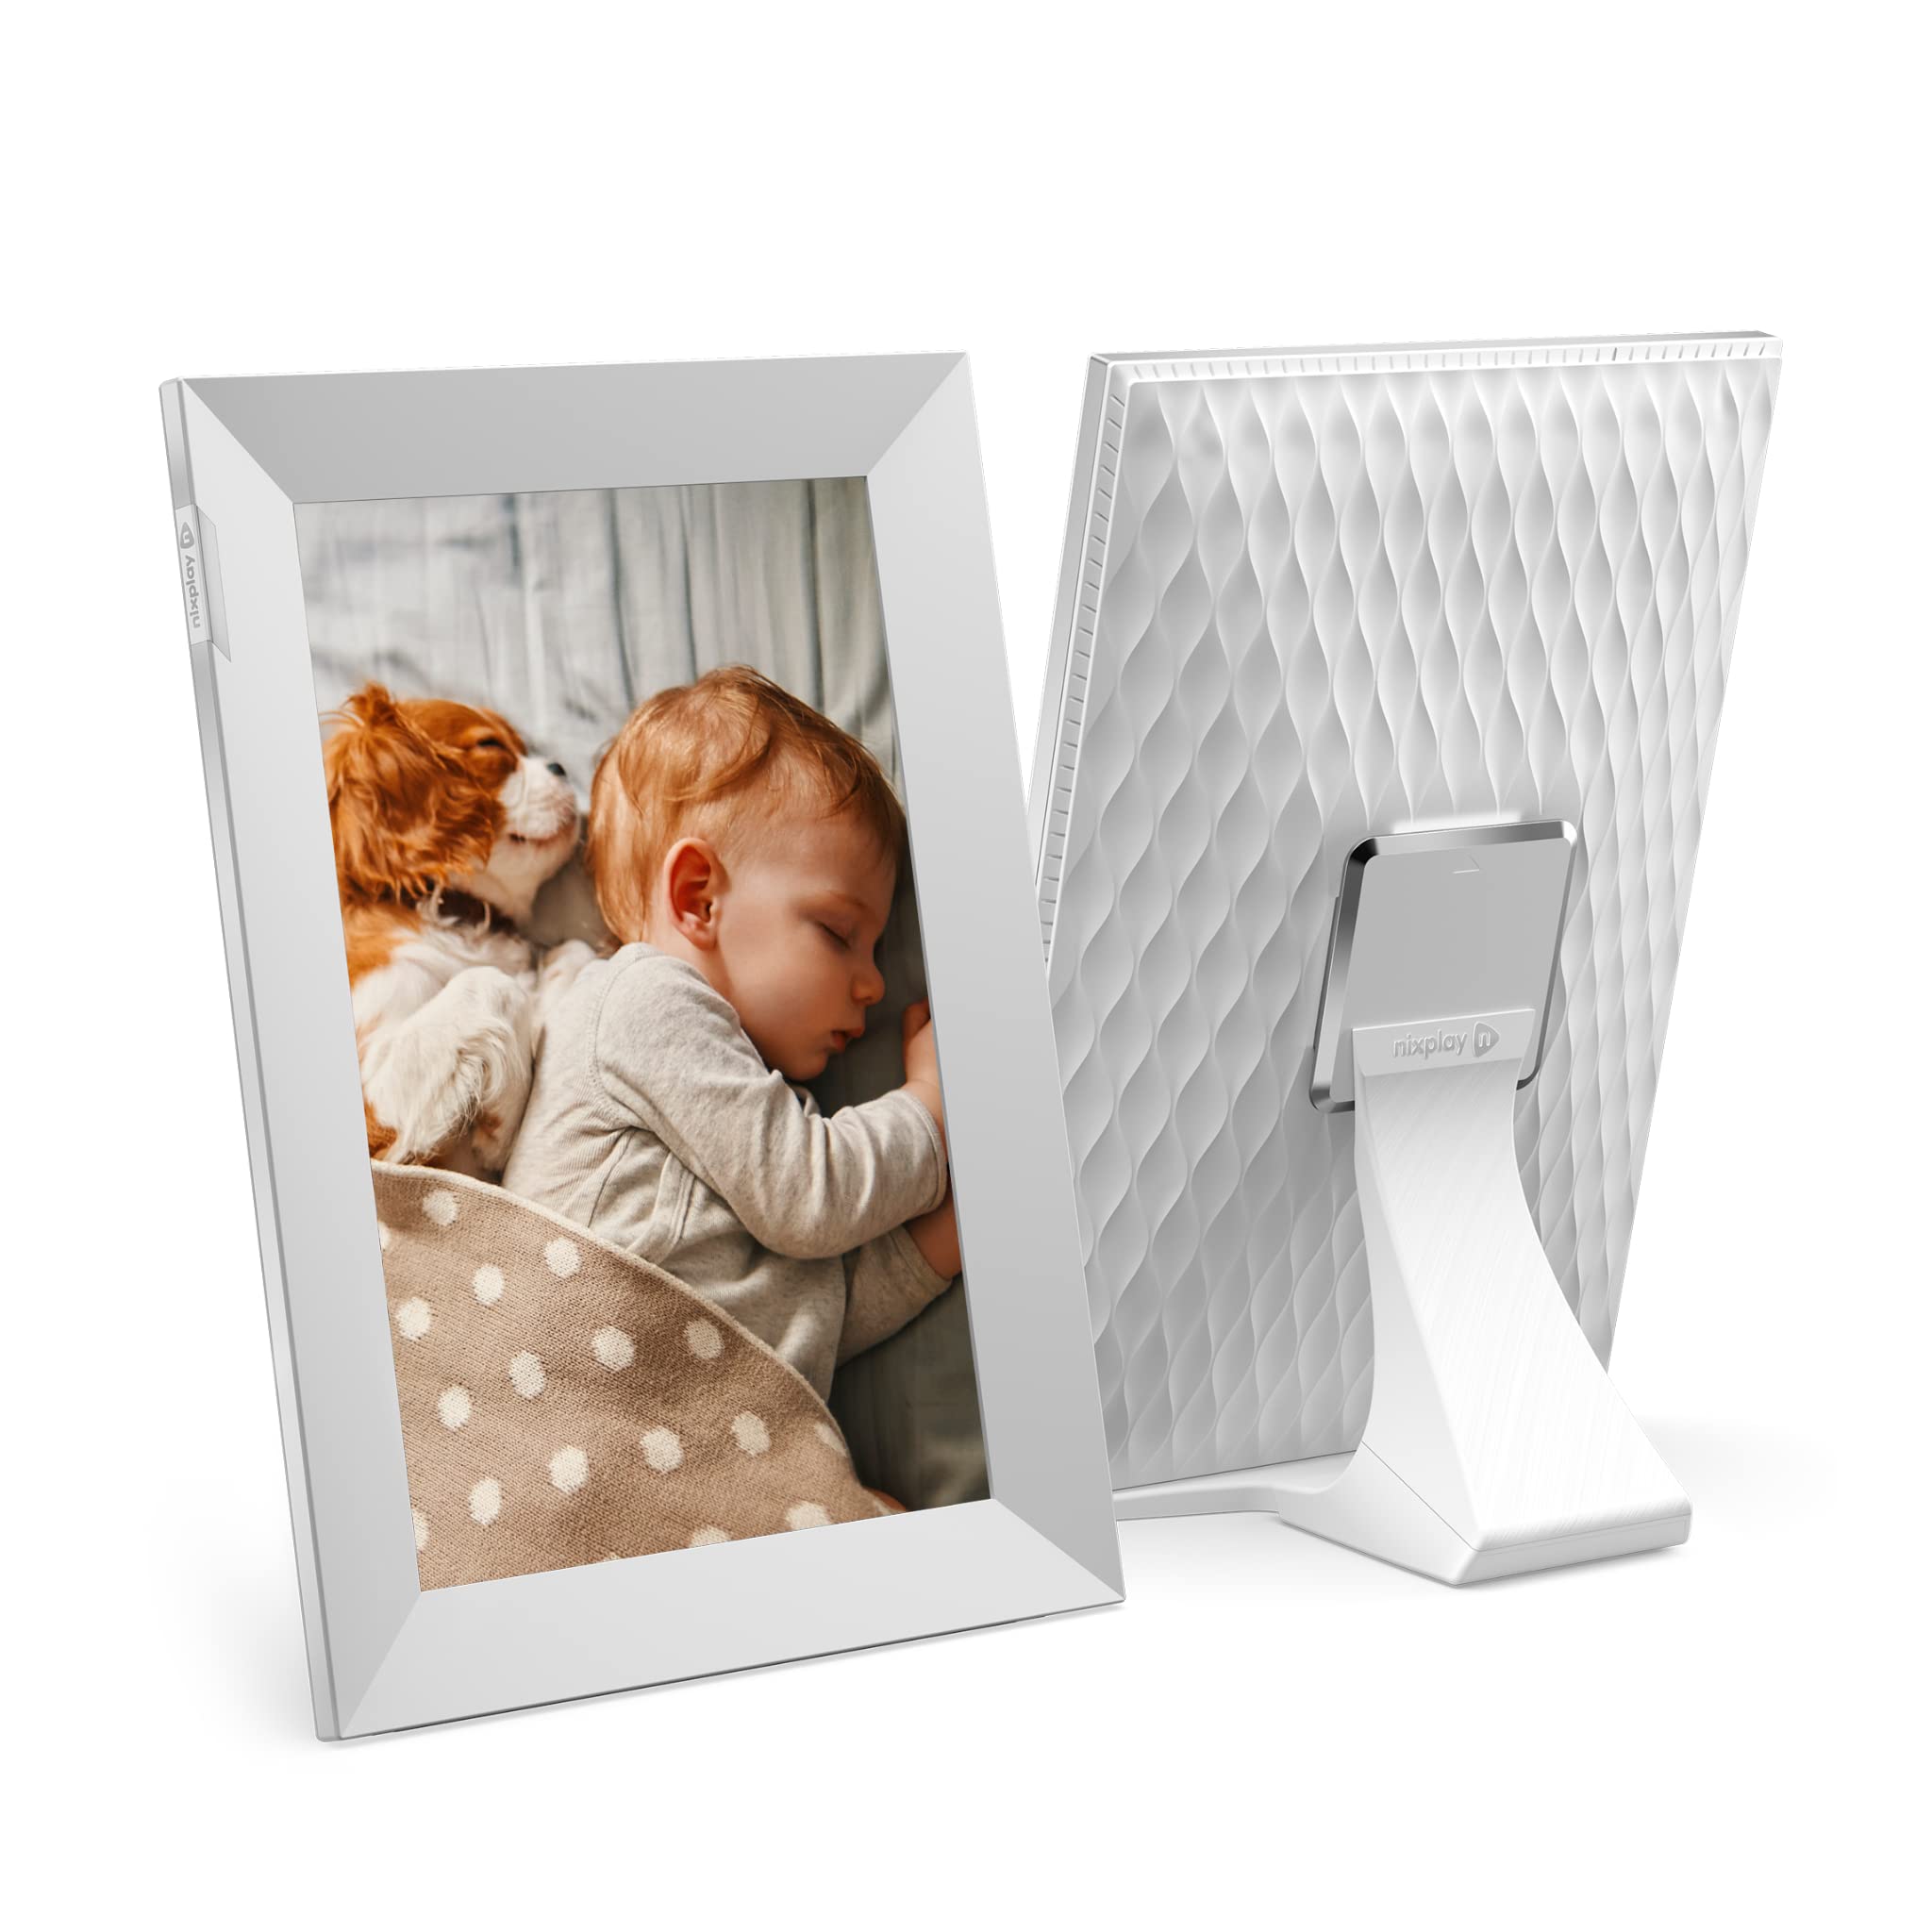 Nixplay 10.1 inch Touch Screen Digital Picture Frame with WiFi (W10K) - White - Unlimited Cloud Photo Storage - Share Photos and Videos Instantly via Email or App - Preload Content